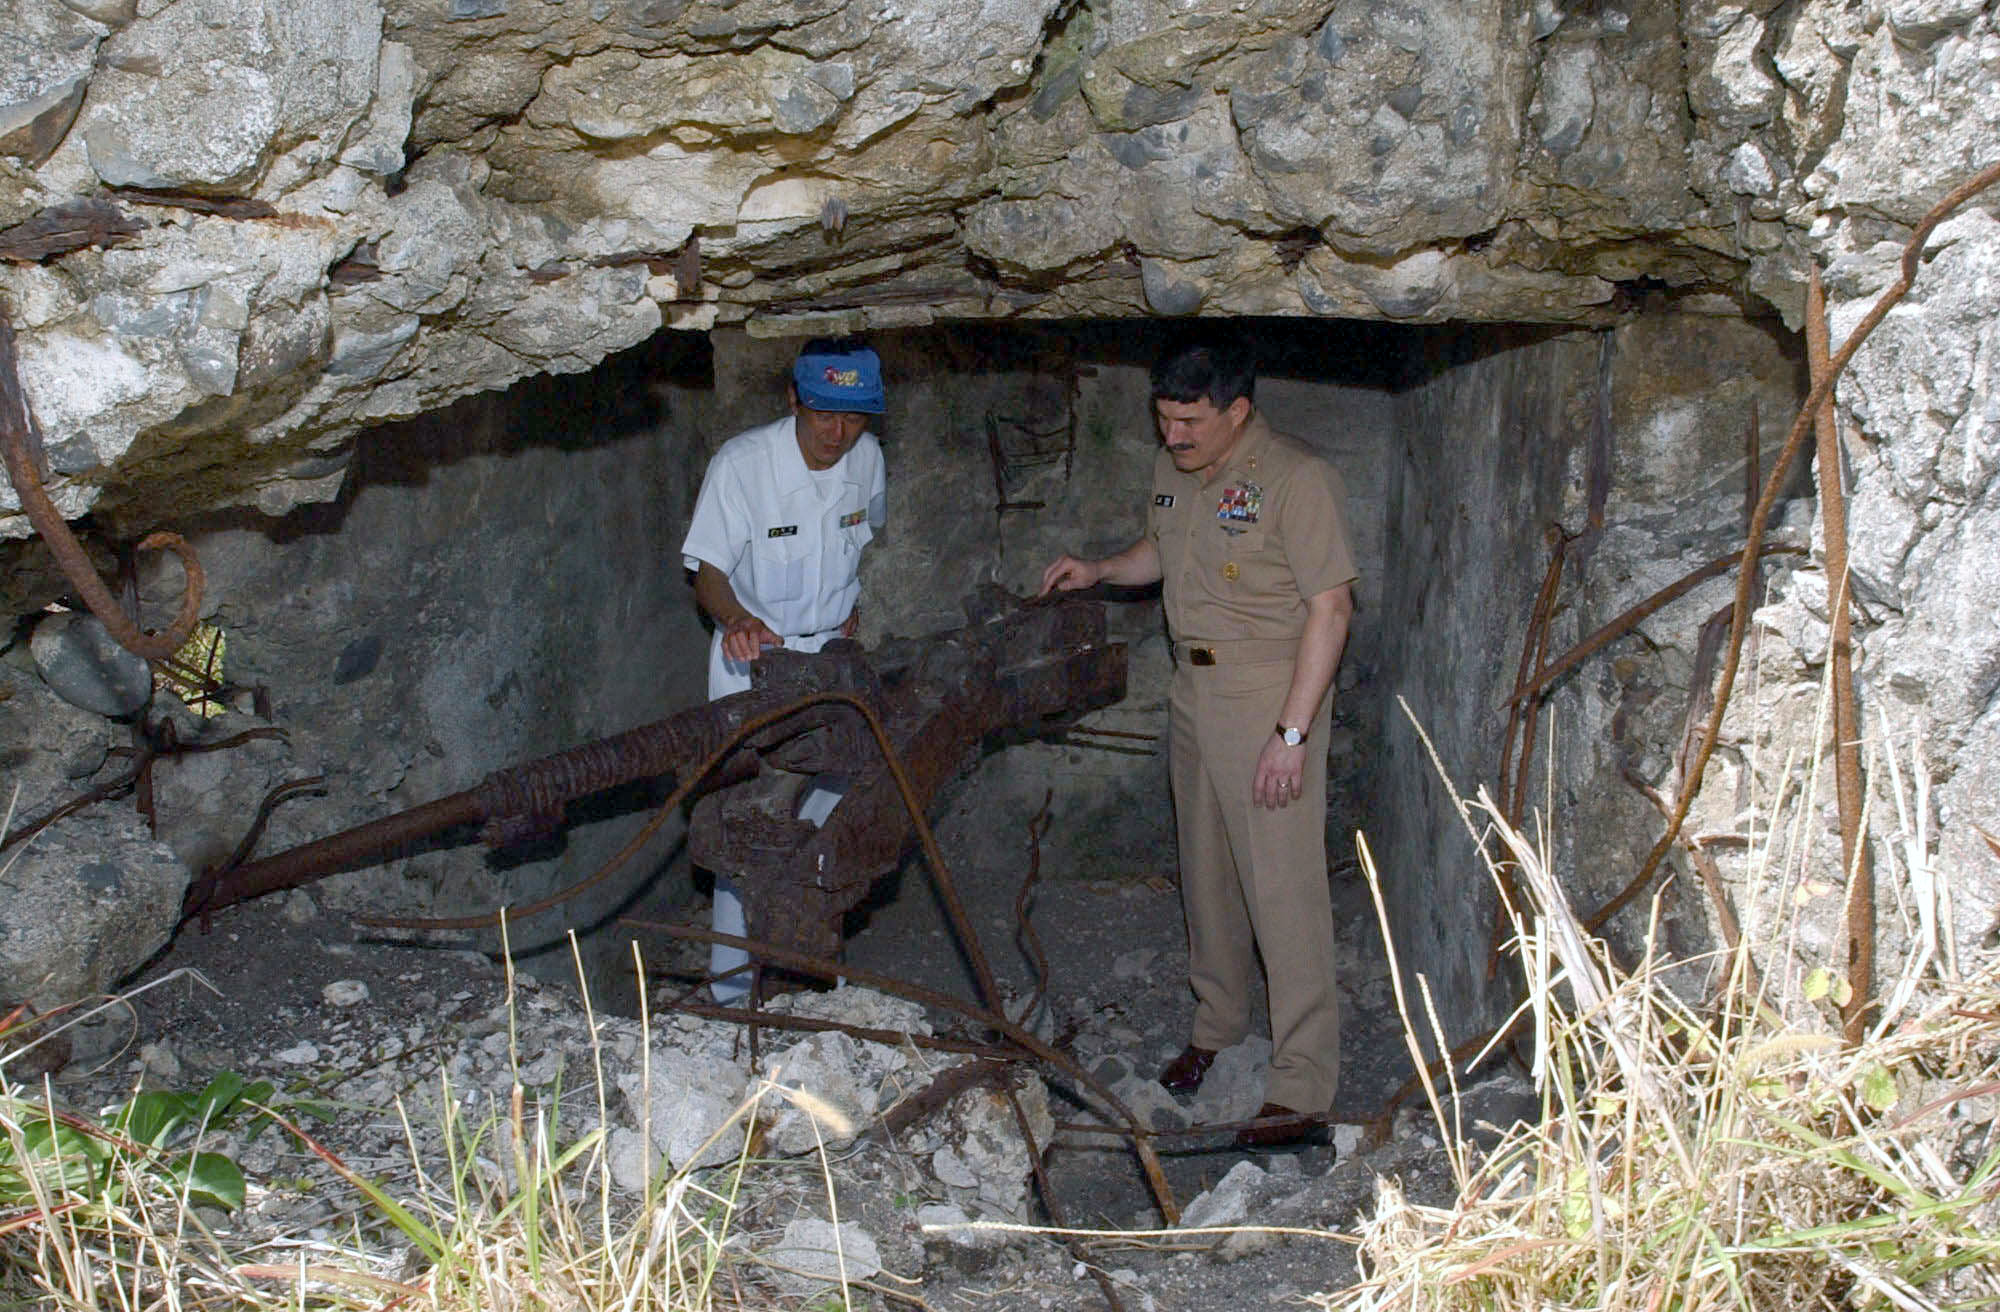 US Navy Master Chief Petty Officer Terry Scott inspecting an old Japanese Type 96 25mm gun at Iwo Jima, Japan, 23 Mar 2003